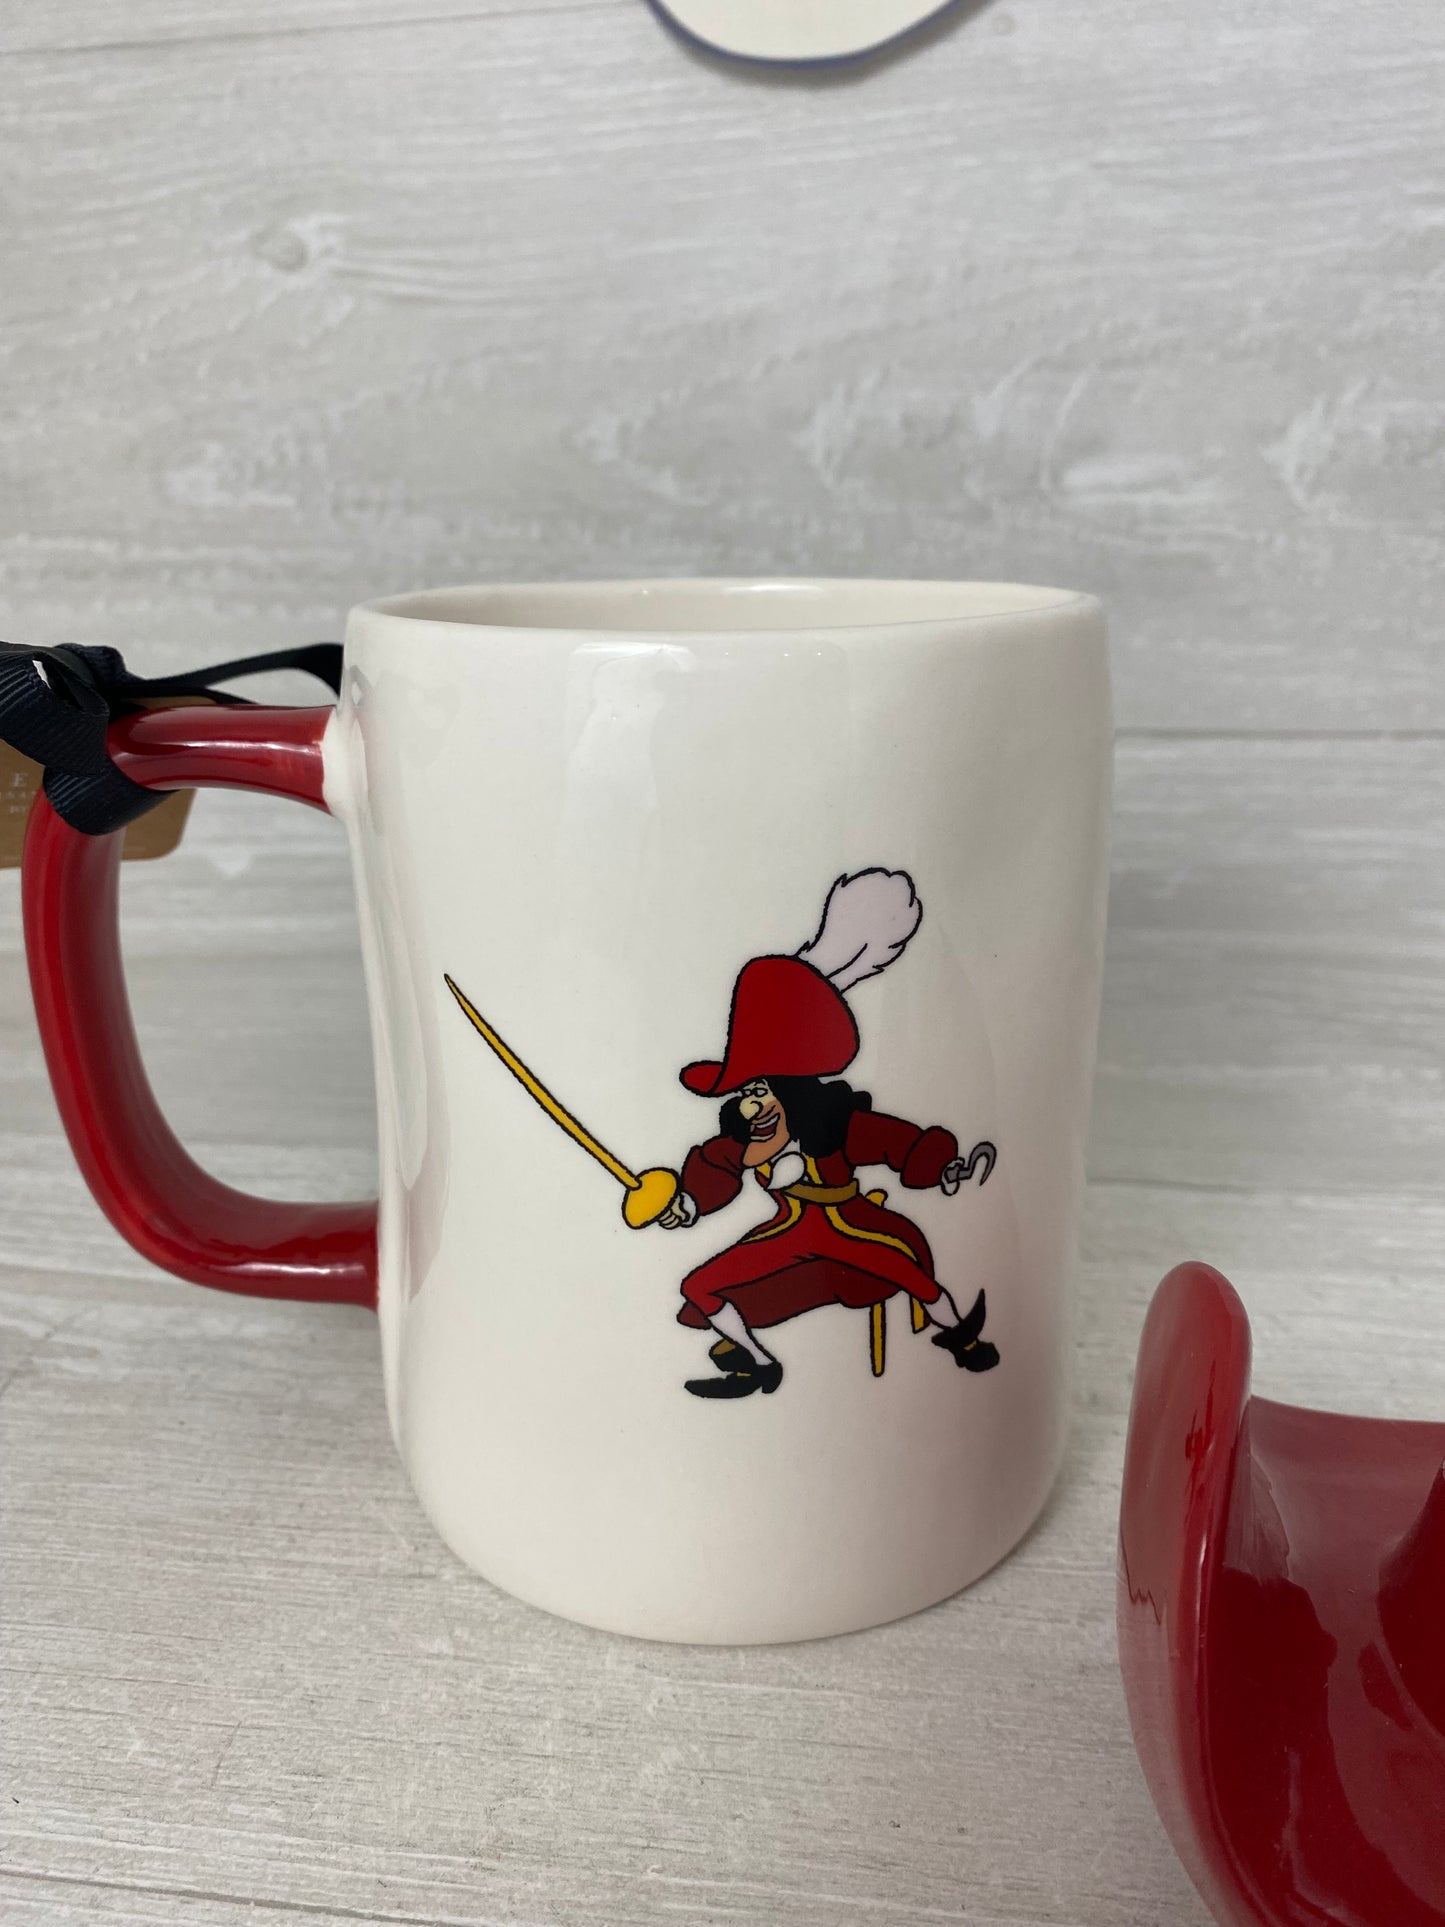 The Disney Collection by Rae Dunn CAPTAIN HOOK Mug with Hat Topper